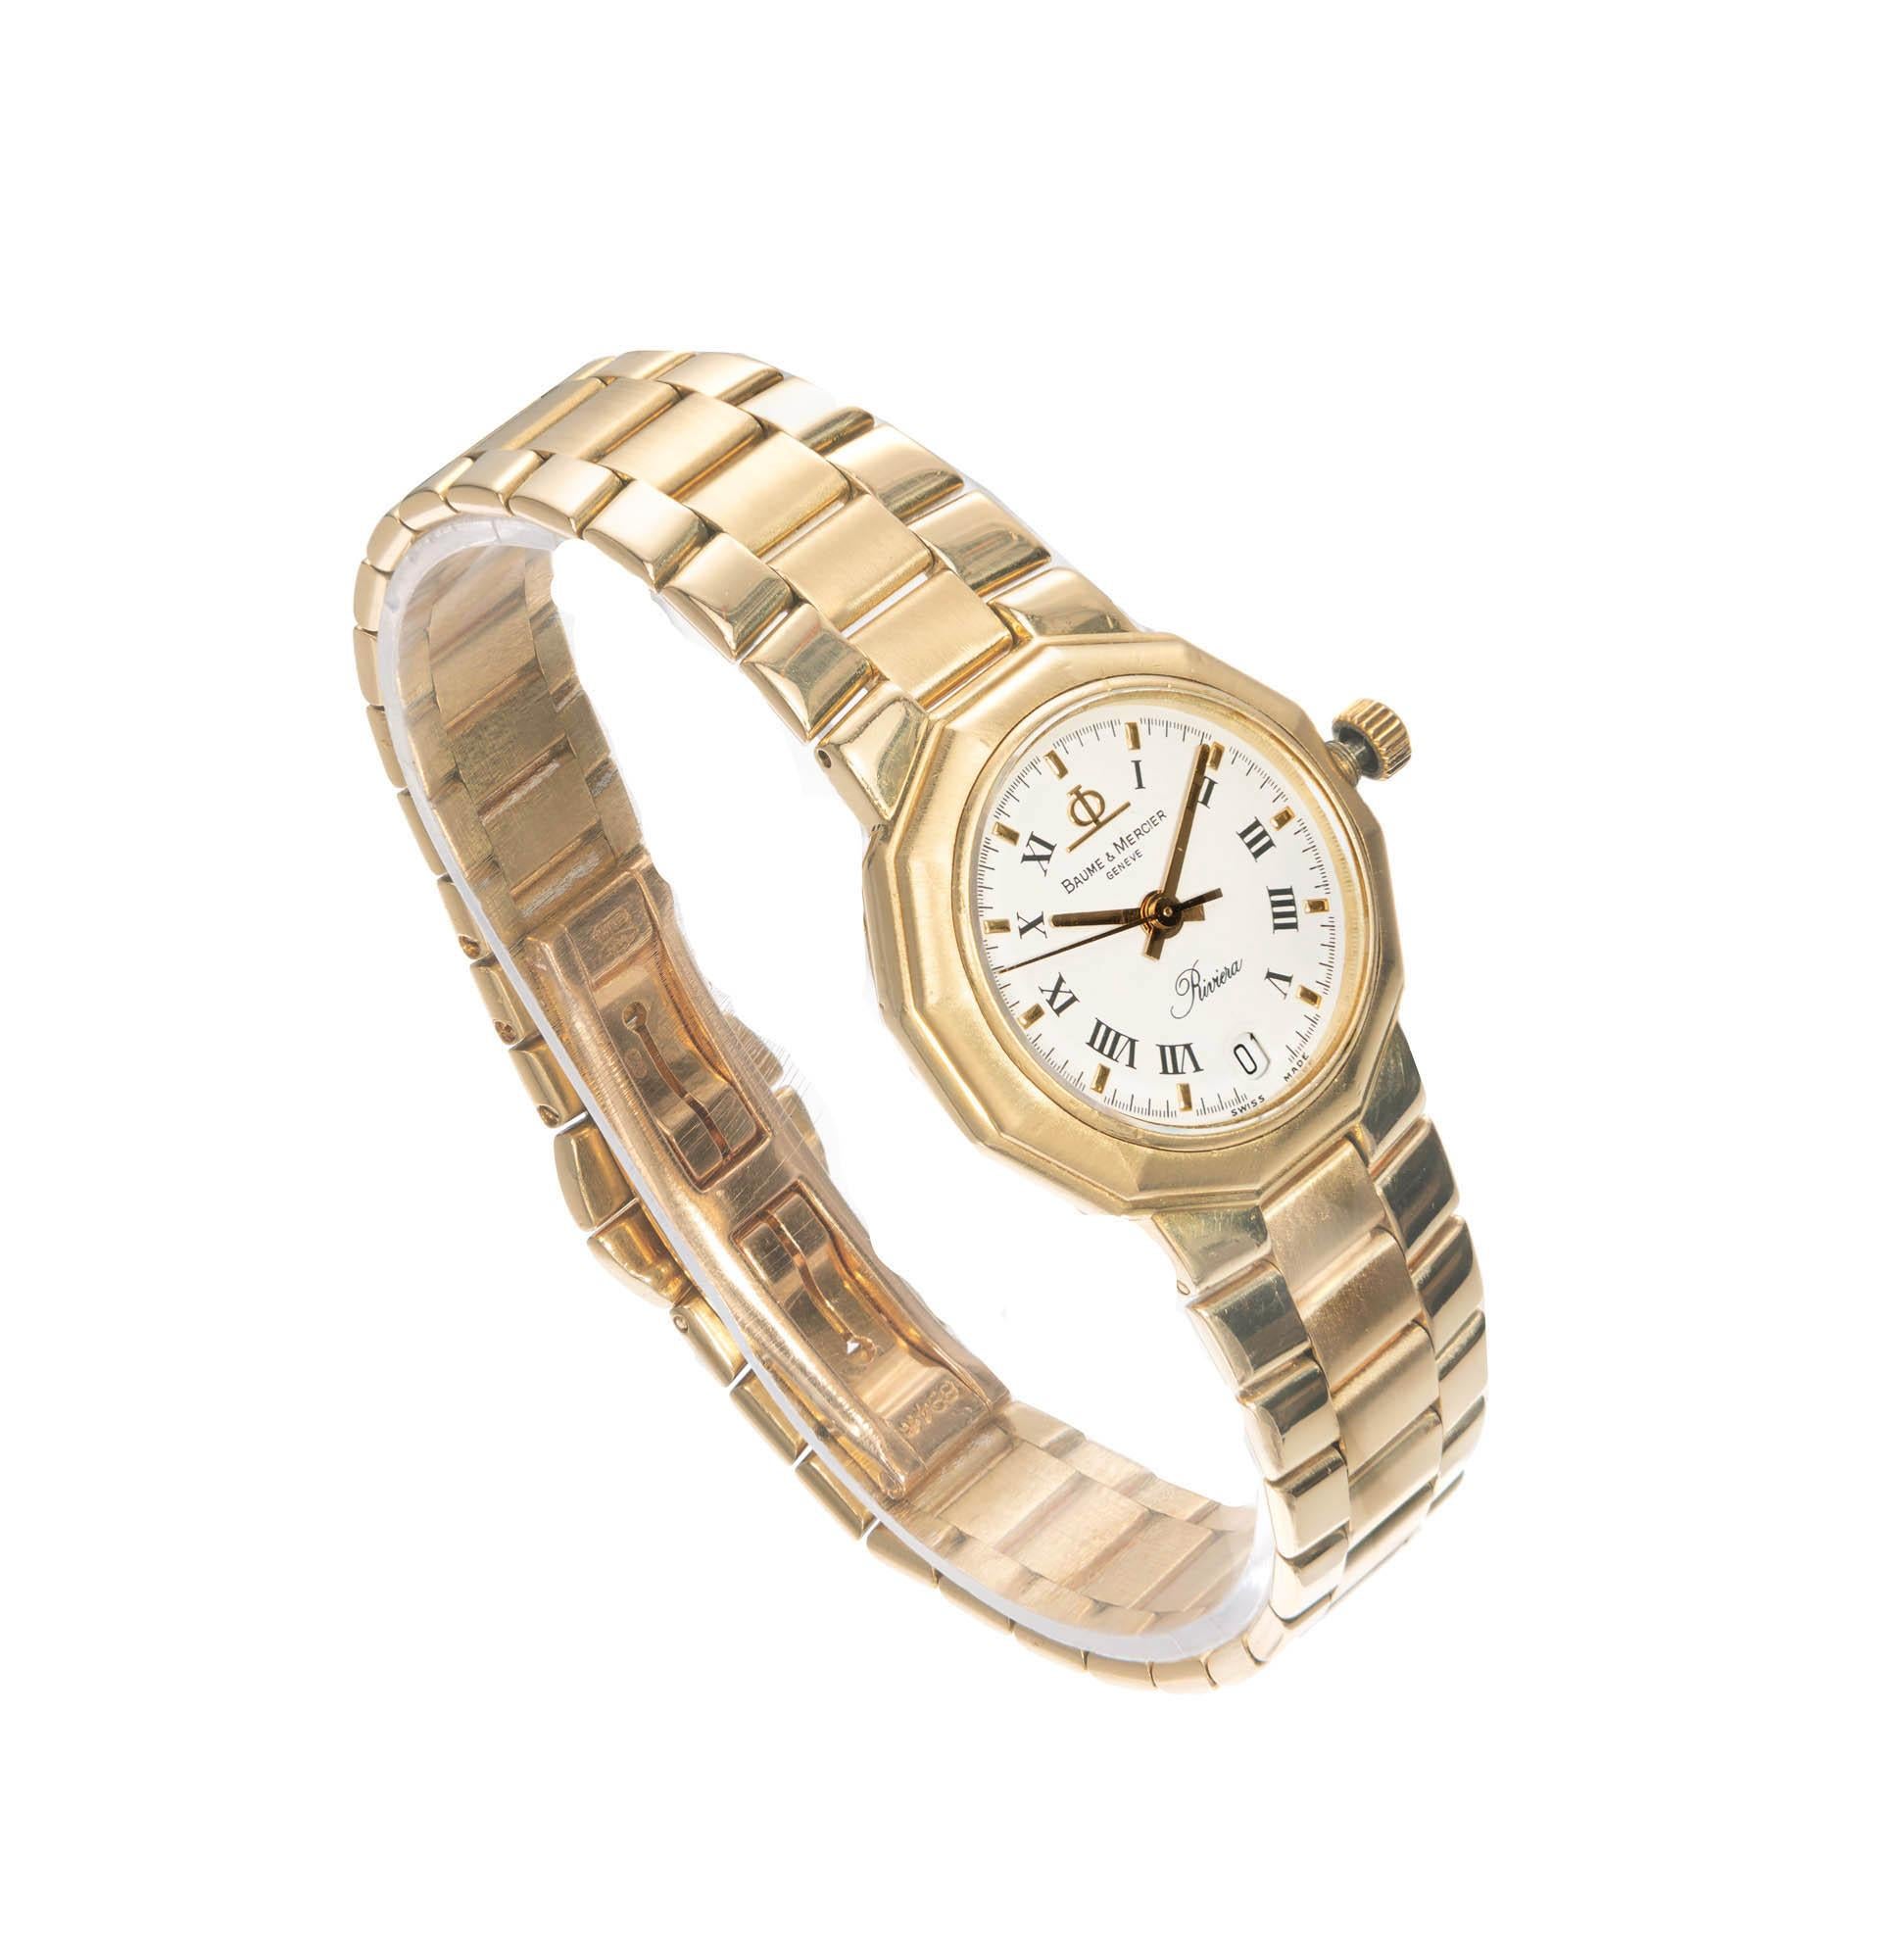 Baume & Mercier yellow gold riviera wristwatch. Solid 18k yellow gold case and band. Reliable Quartz movement, date.

Length: 29mm
Width: 24.8mm
Band width at case: 14mm
Case Thickness: 5.93mm
Band: 18k yellow gold
Crystal: sapphire
Dial: Eggshell